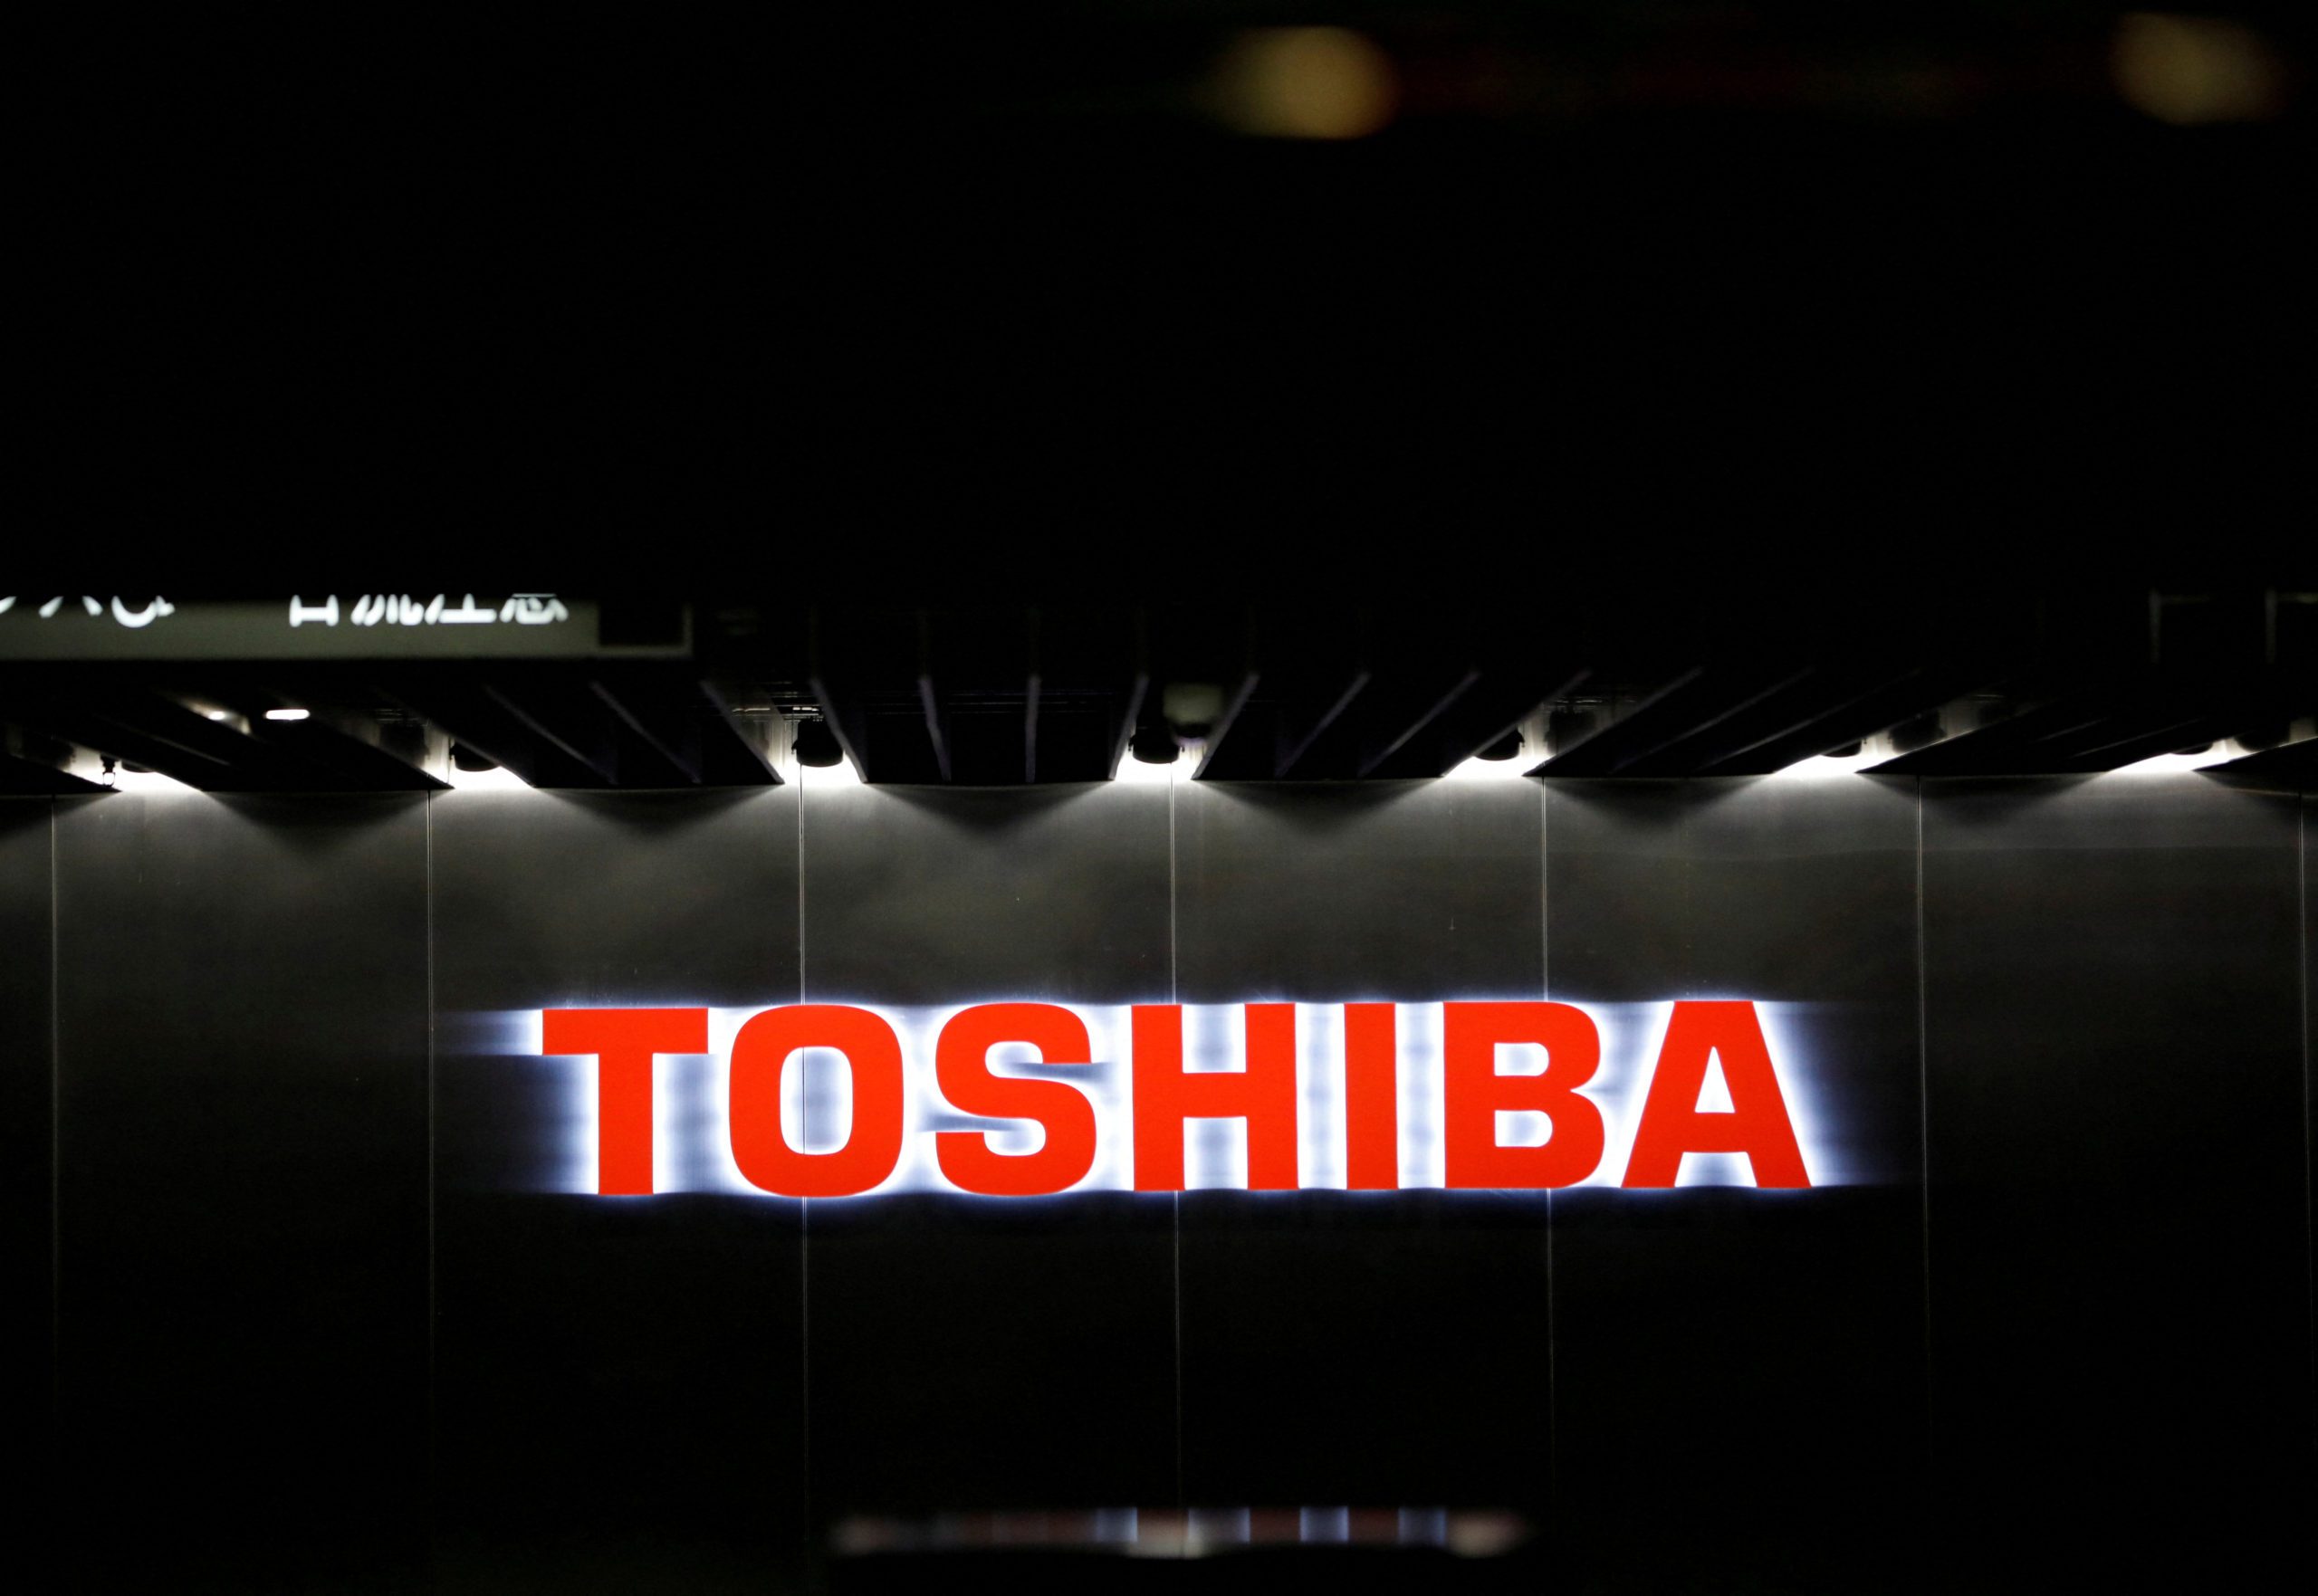 Toshiba's board agrees to accept $15.3b buyout proposal from JIP-led consortium: Nikkei